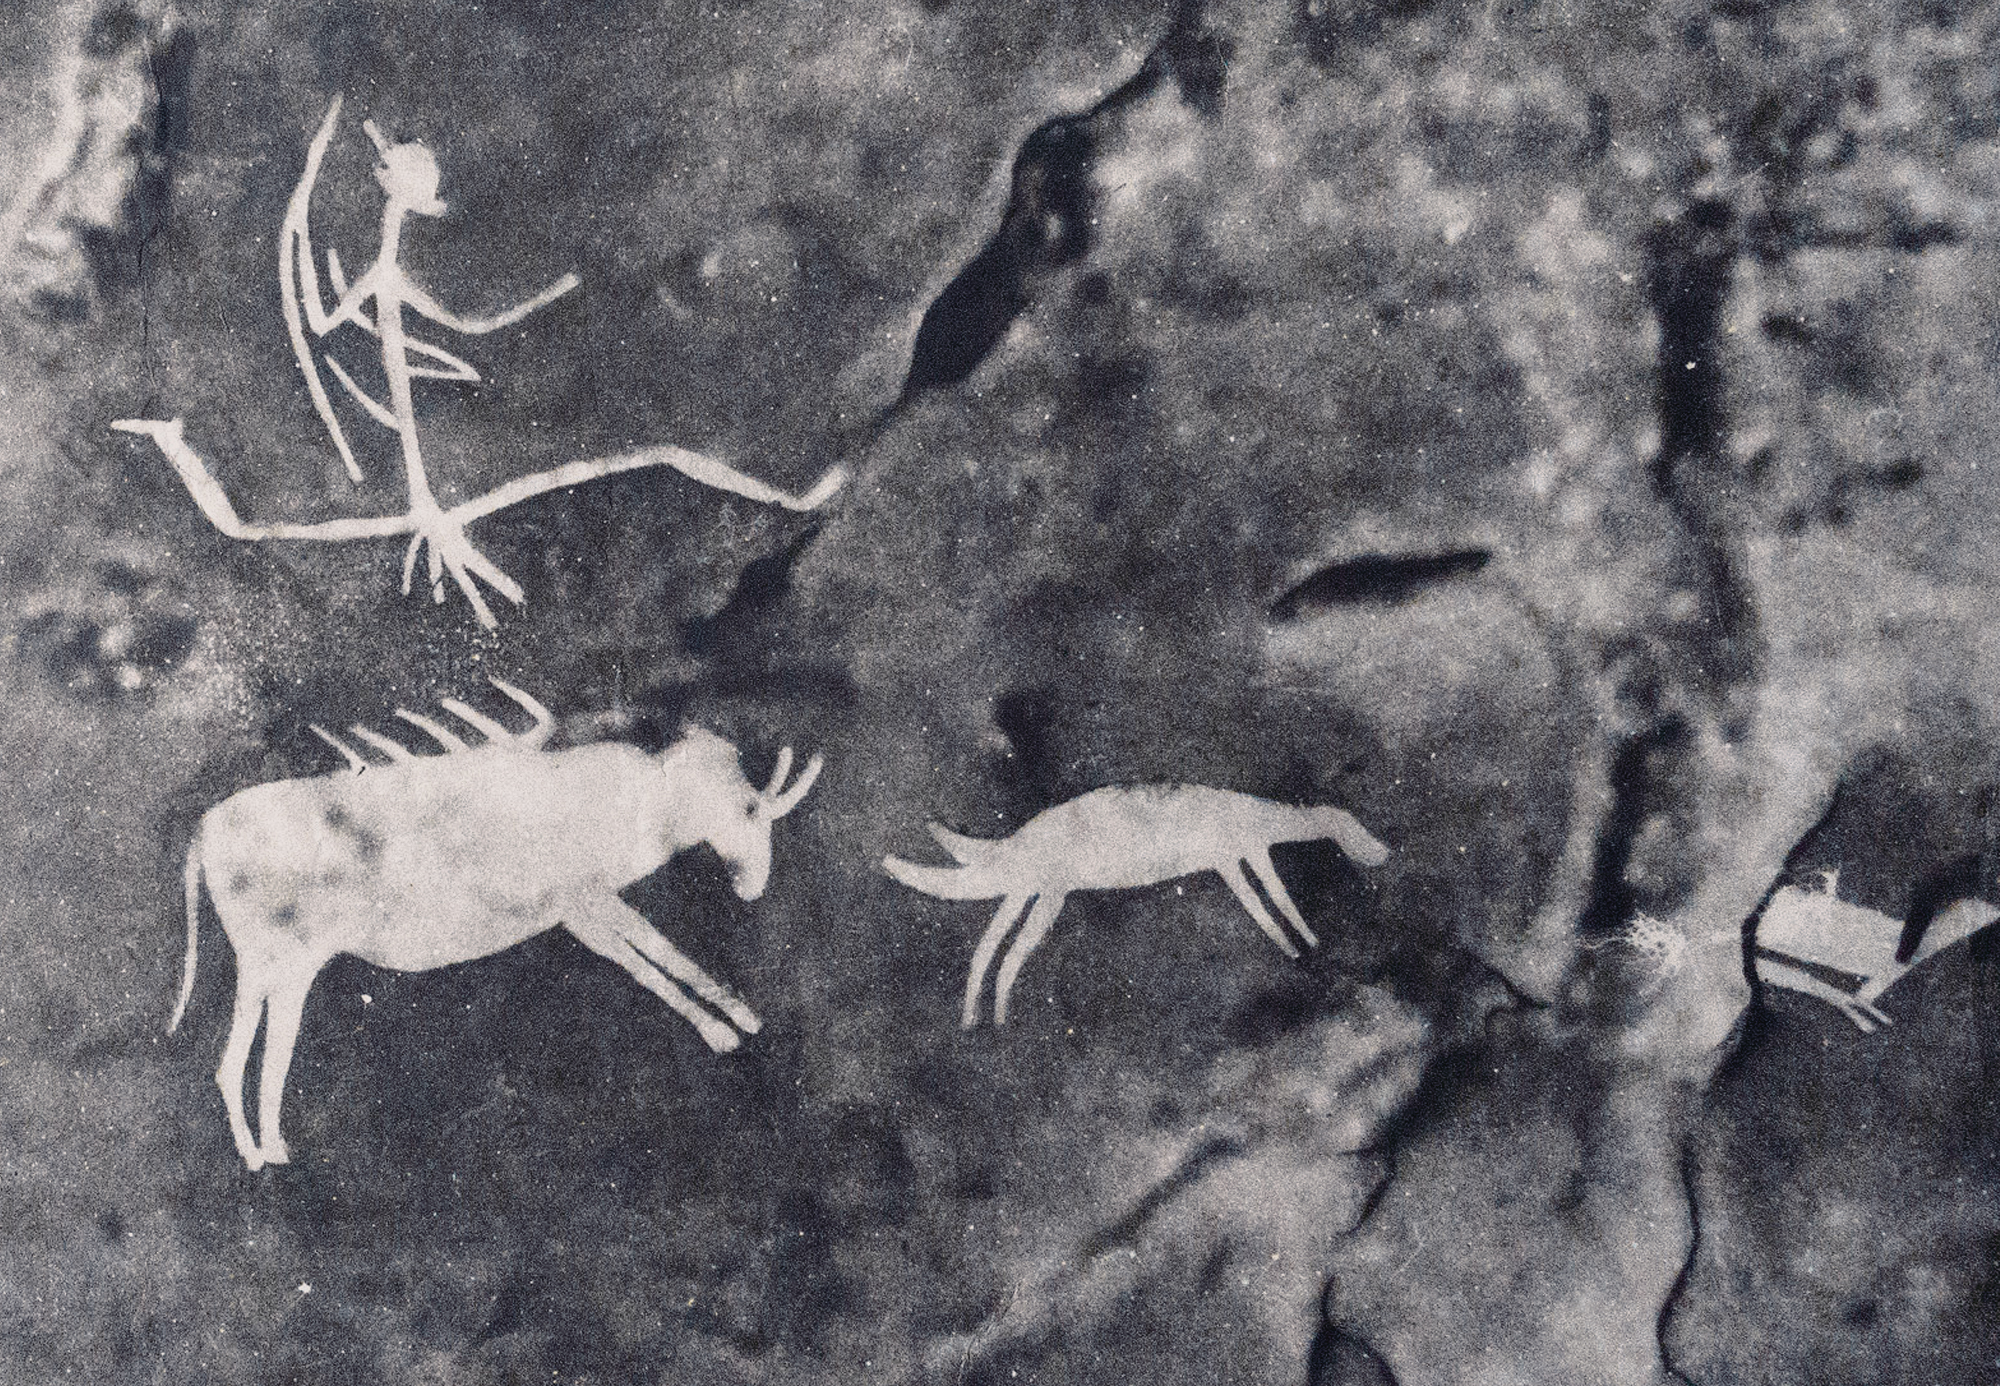 Junction Shelter: from left, an elongated running human, an animal with bristles on its back, a sheep with a double tail, and painted ‘Remains’ (Pager 1971a: 315) emerging from a crack in the rock face. Photographed in the Pager archive at the Rock Art Research Institute, University of the Witwatersrand